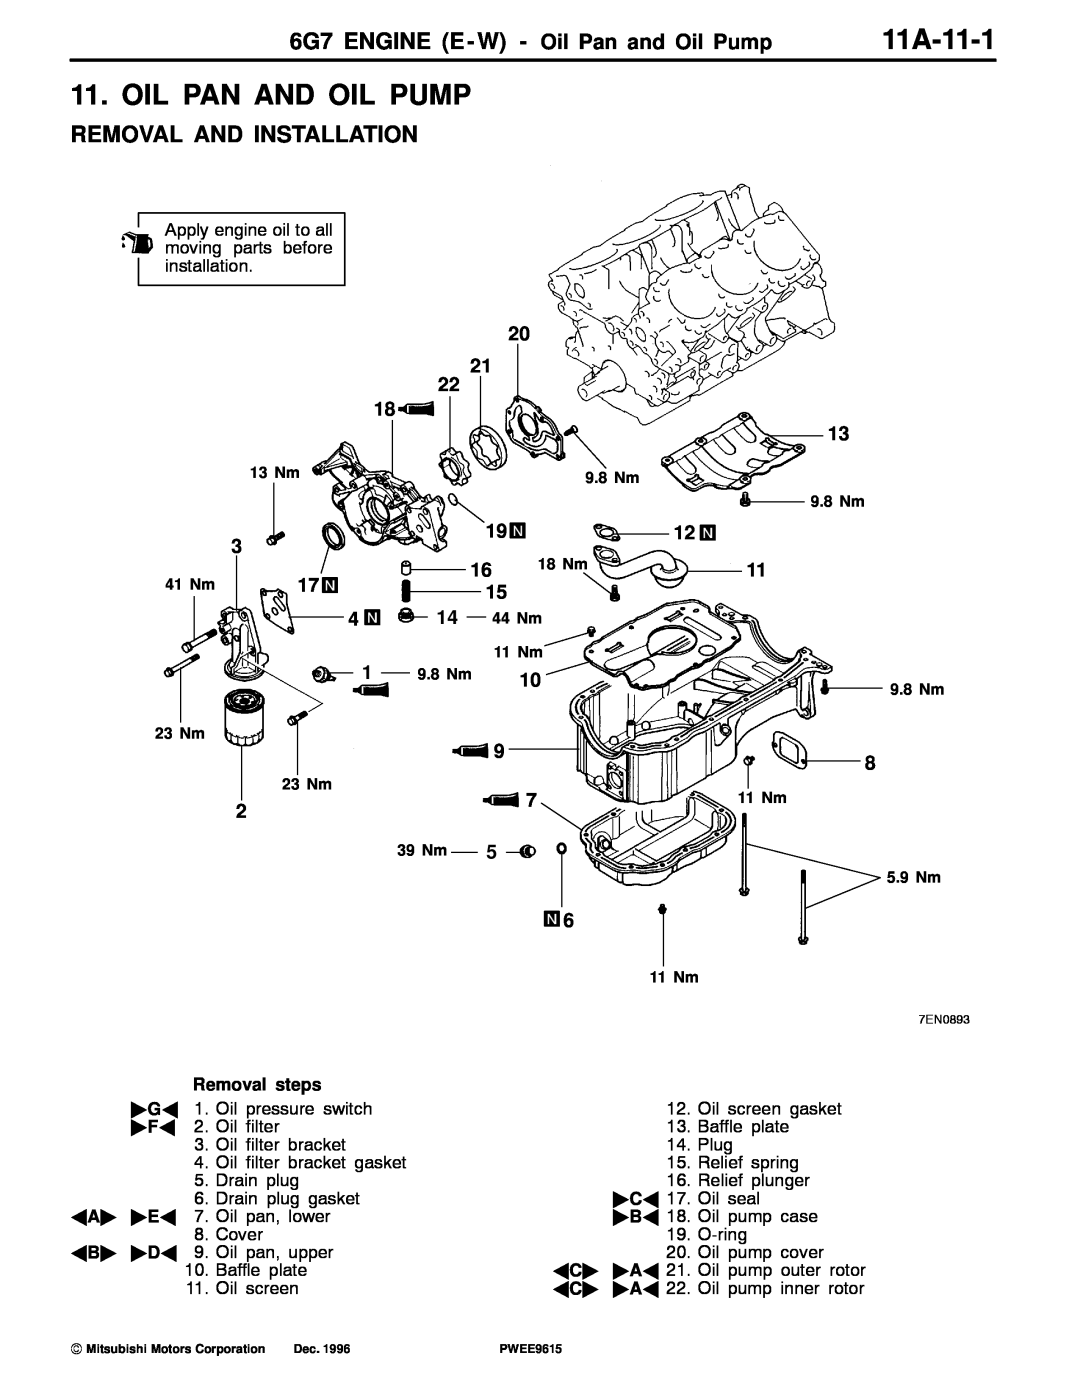 Mitsubishi Oil Pan And Oil Pump, 11A-11-1, 6G7 ENGINE E - W - Oil Pan and Oil Pump, Removal And Installation 